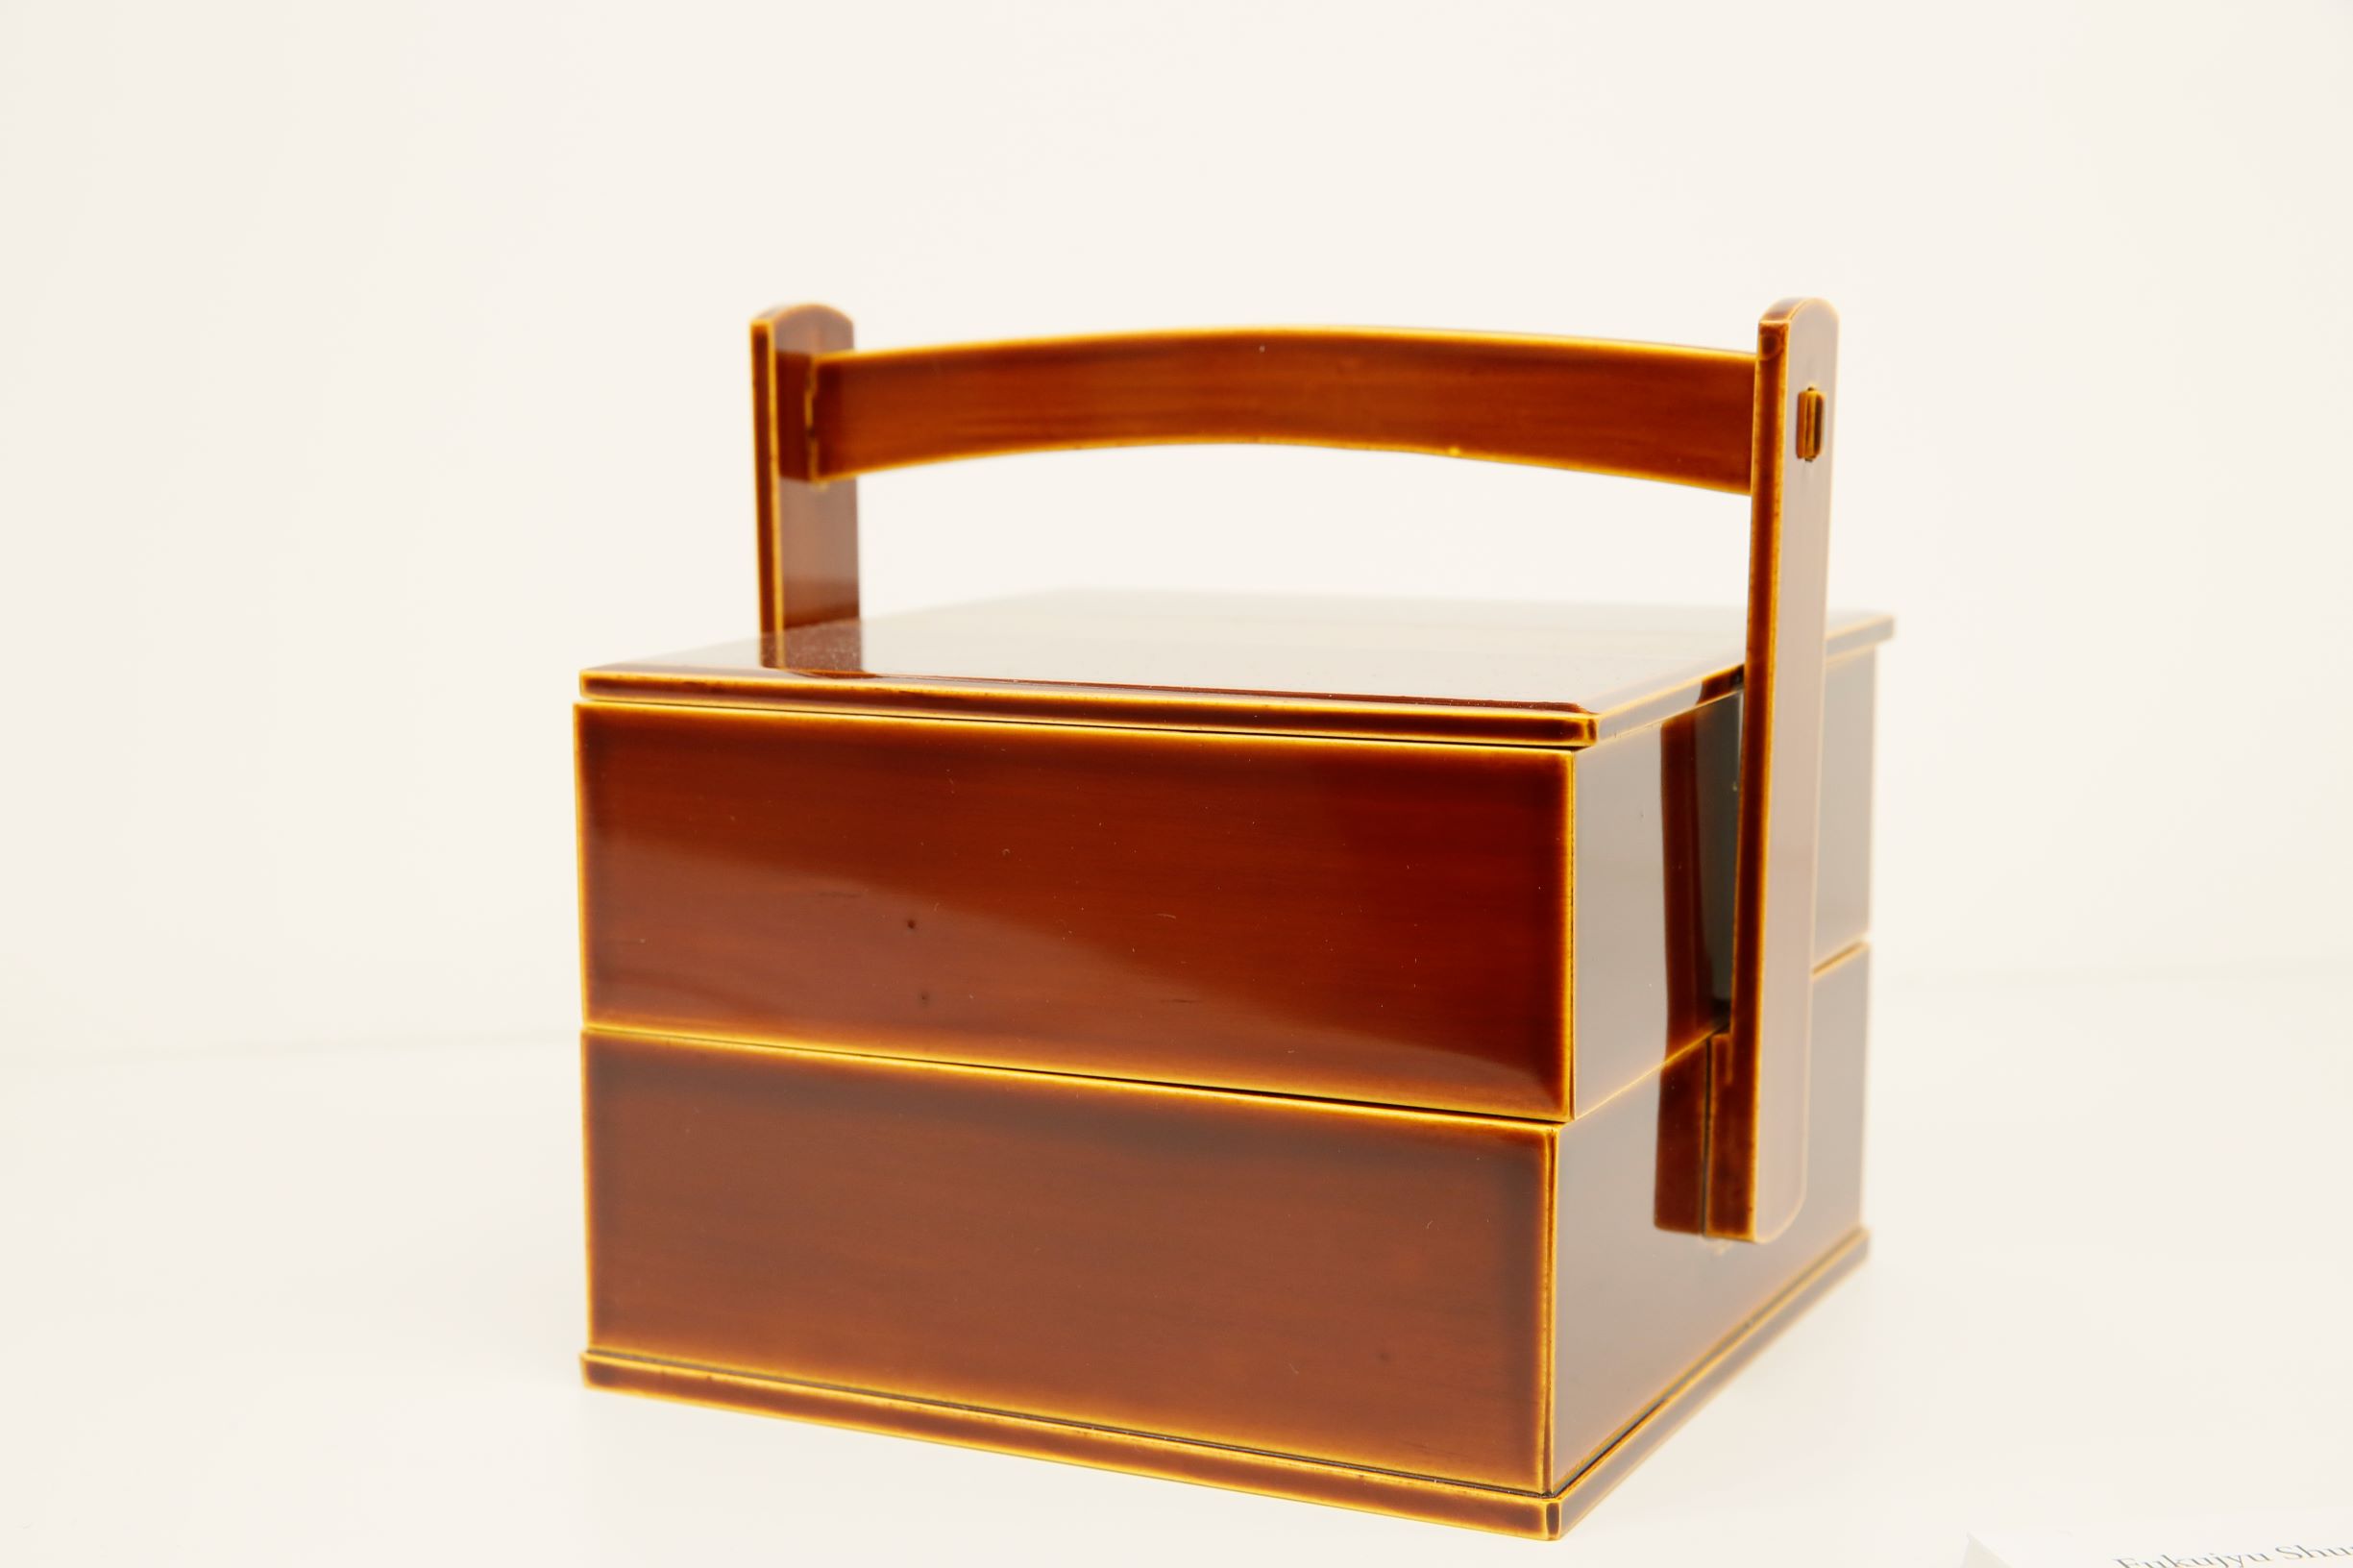 Traditional two-tiered handled box